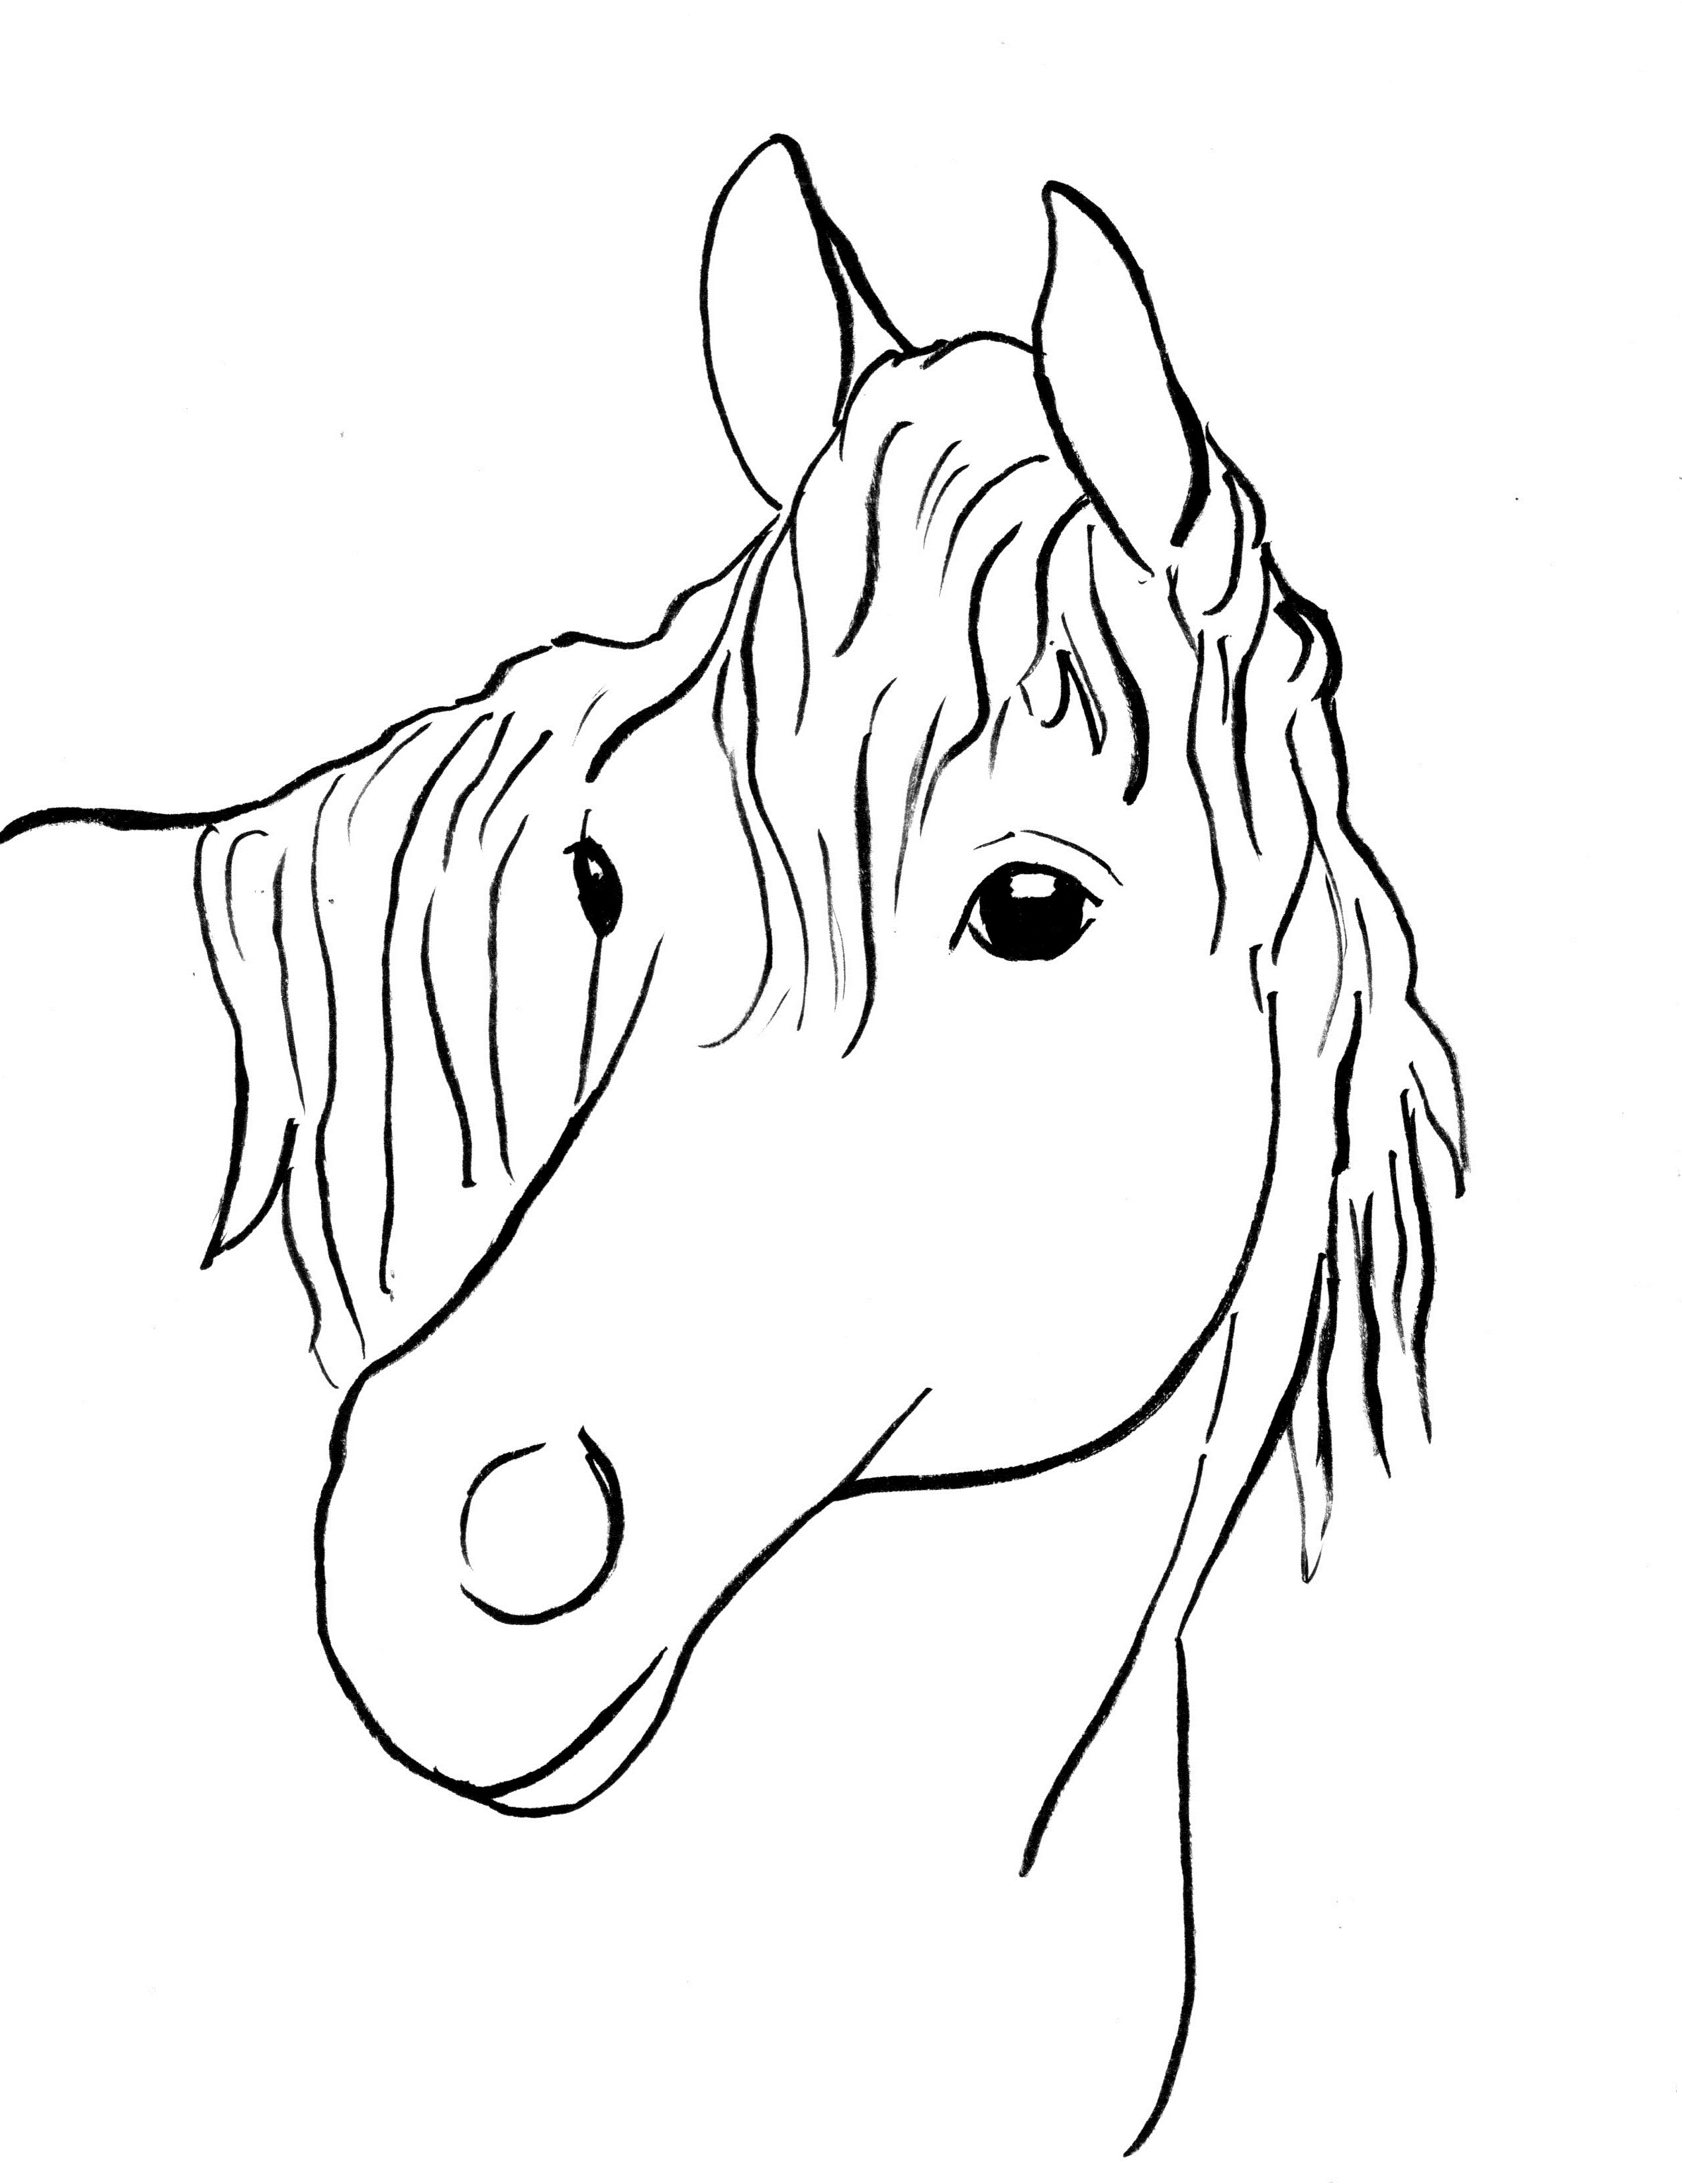 horse-coloring-page-art-starts